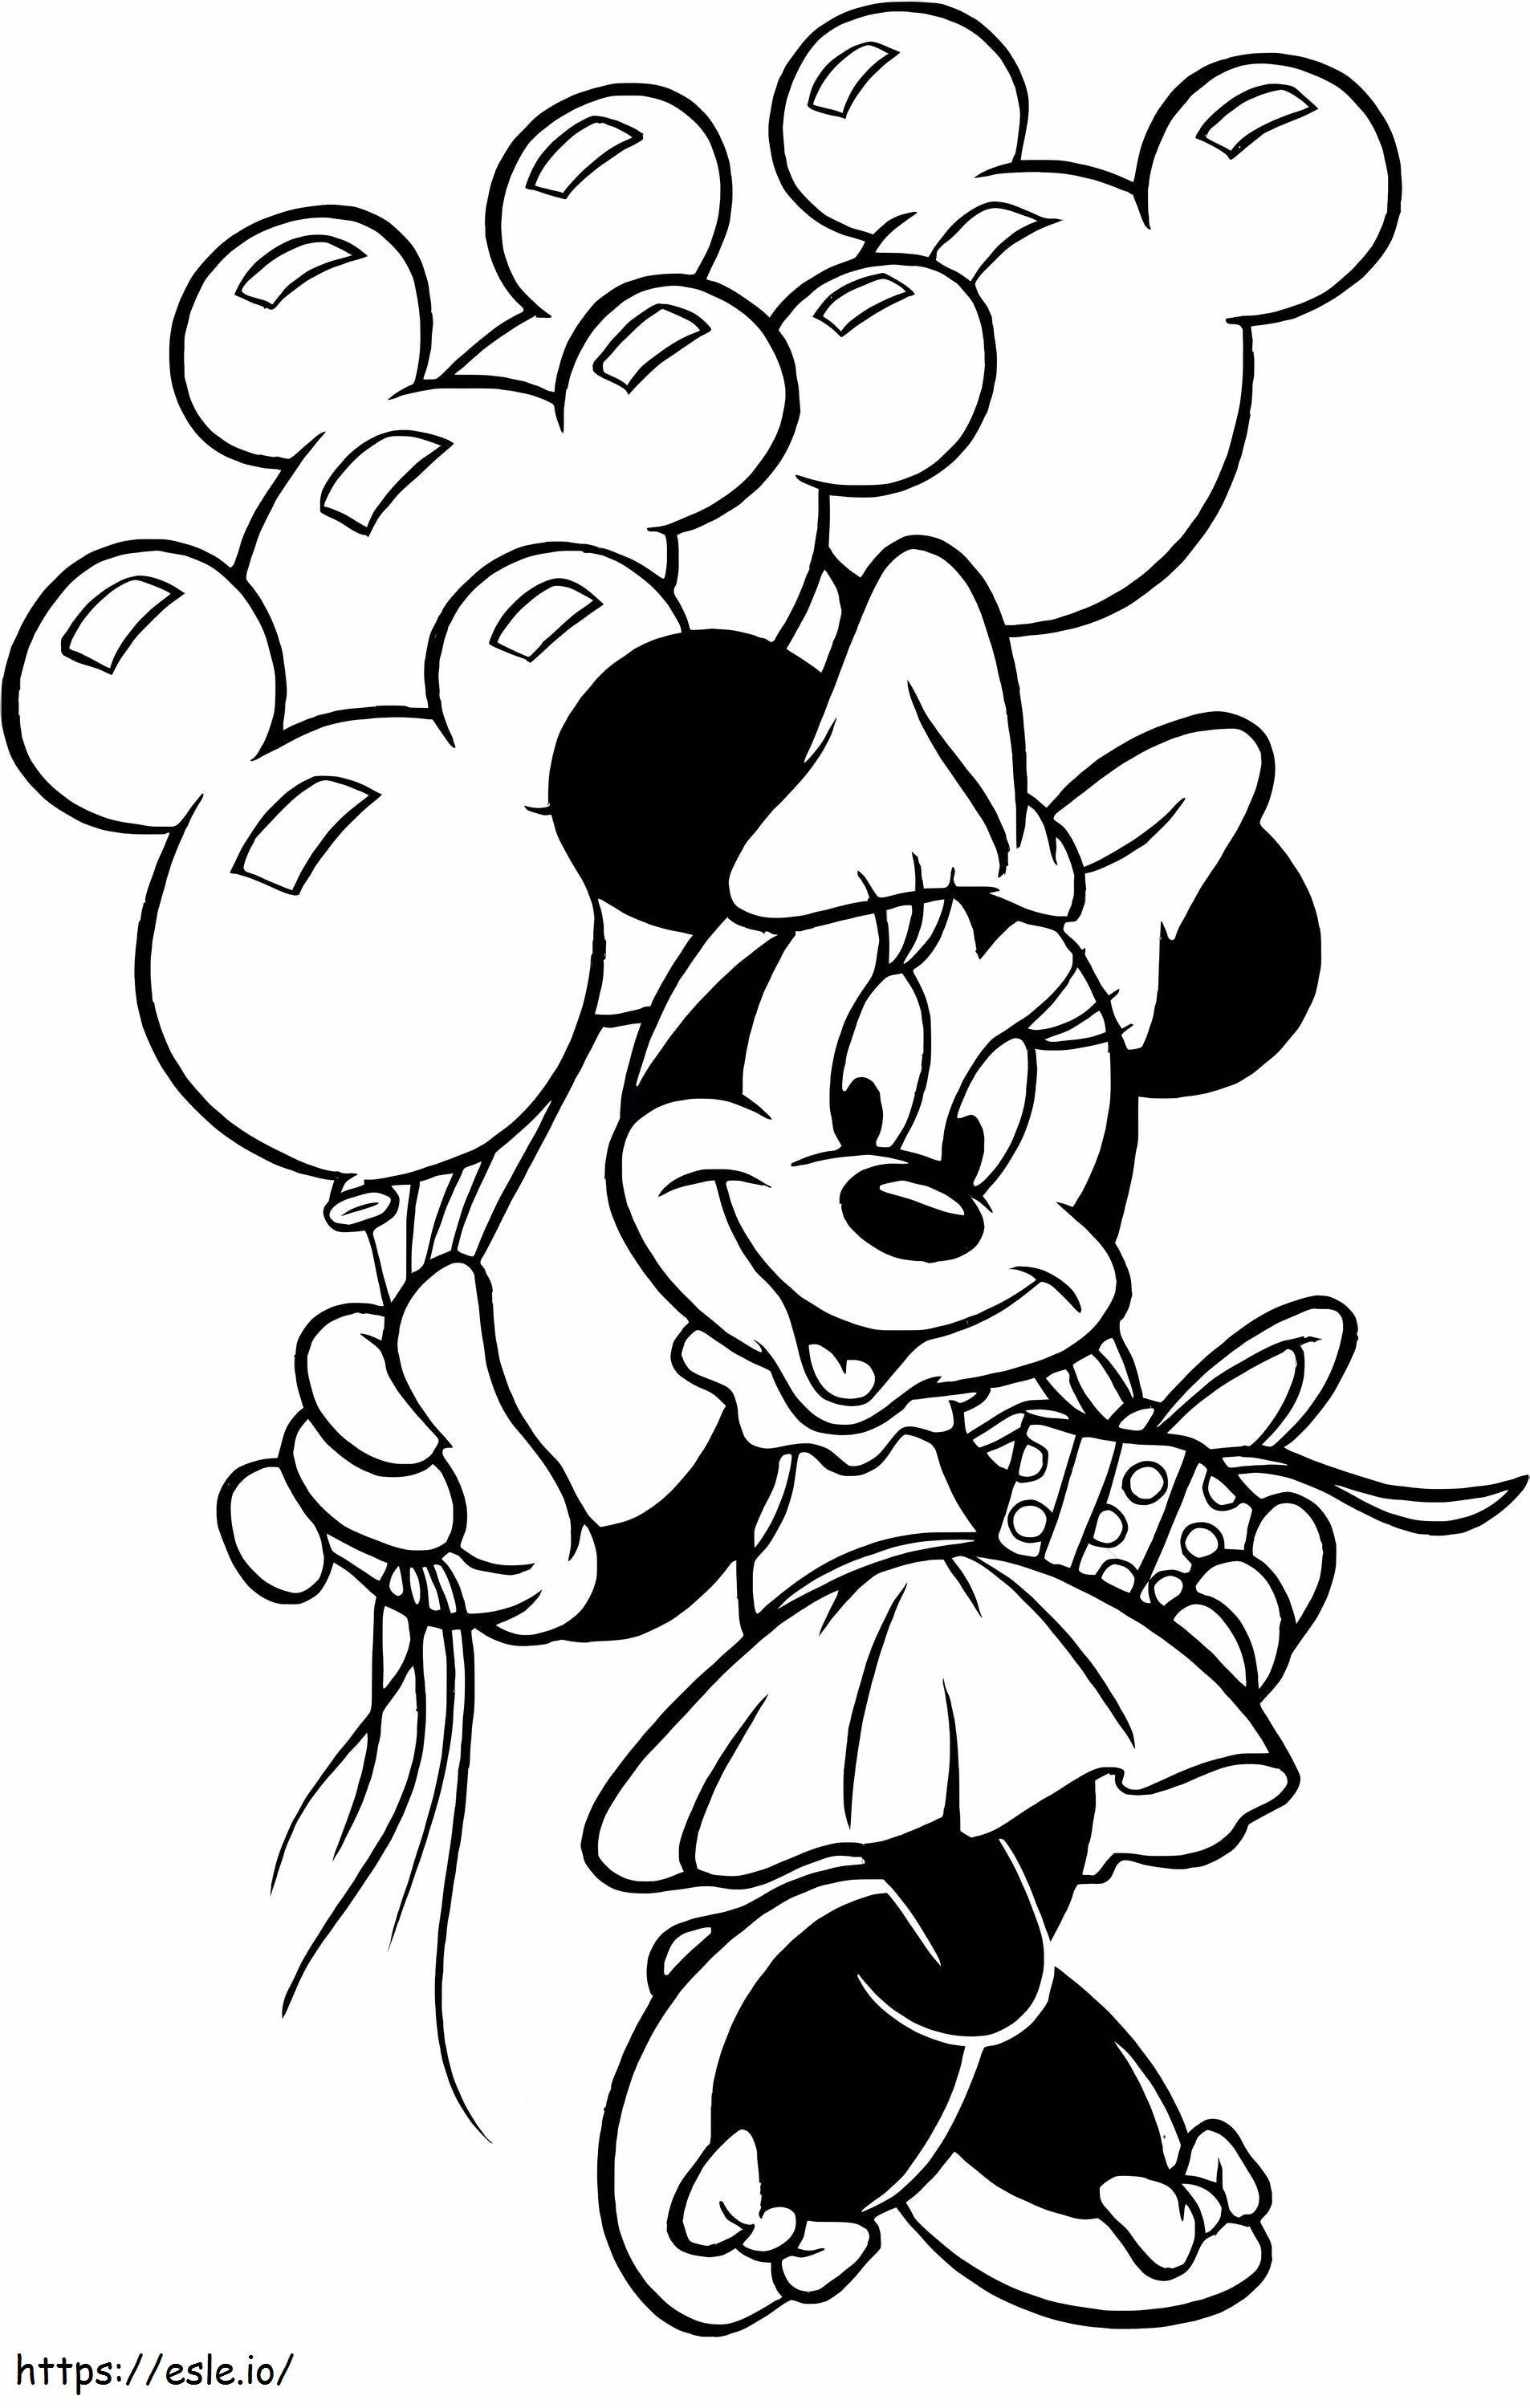 Minnie Mouse With Gift Box And Balloons At Christmas coloring page